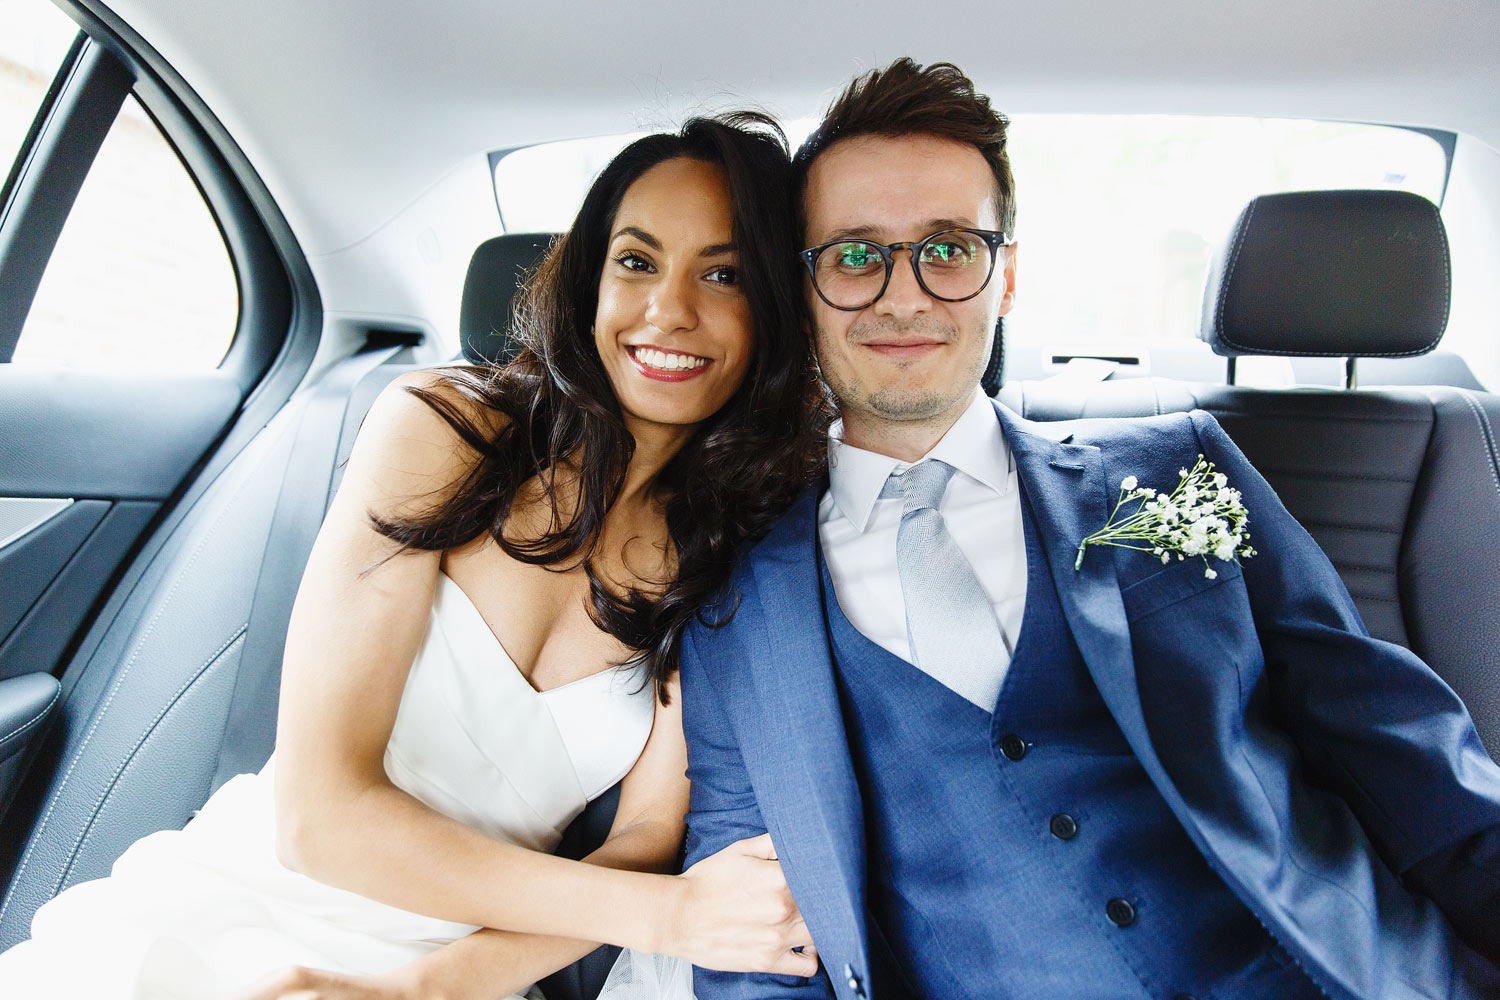 A gorgeous bride and groom travel to their wedding recetipn - wedding photography pricing